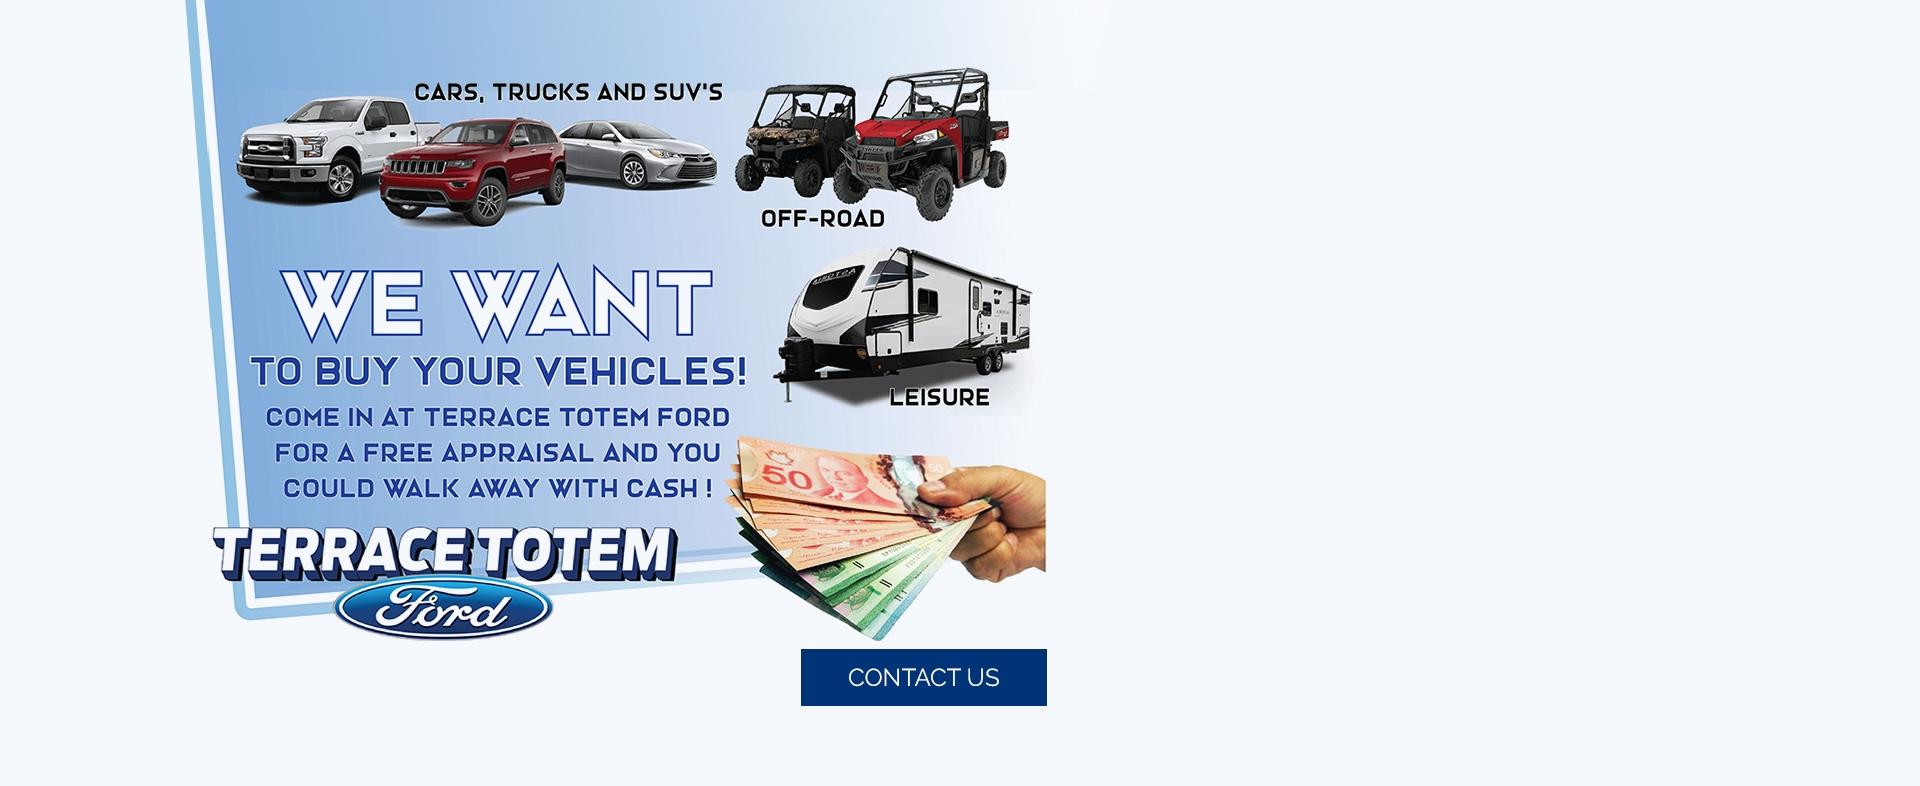 We will buy your vehicle